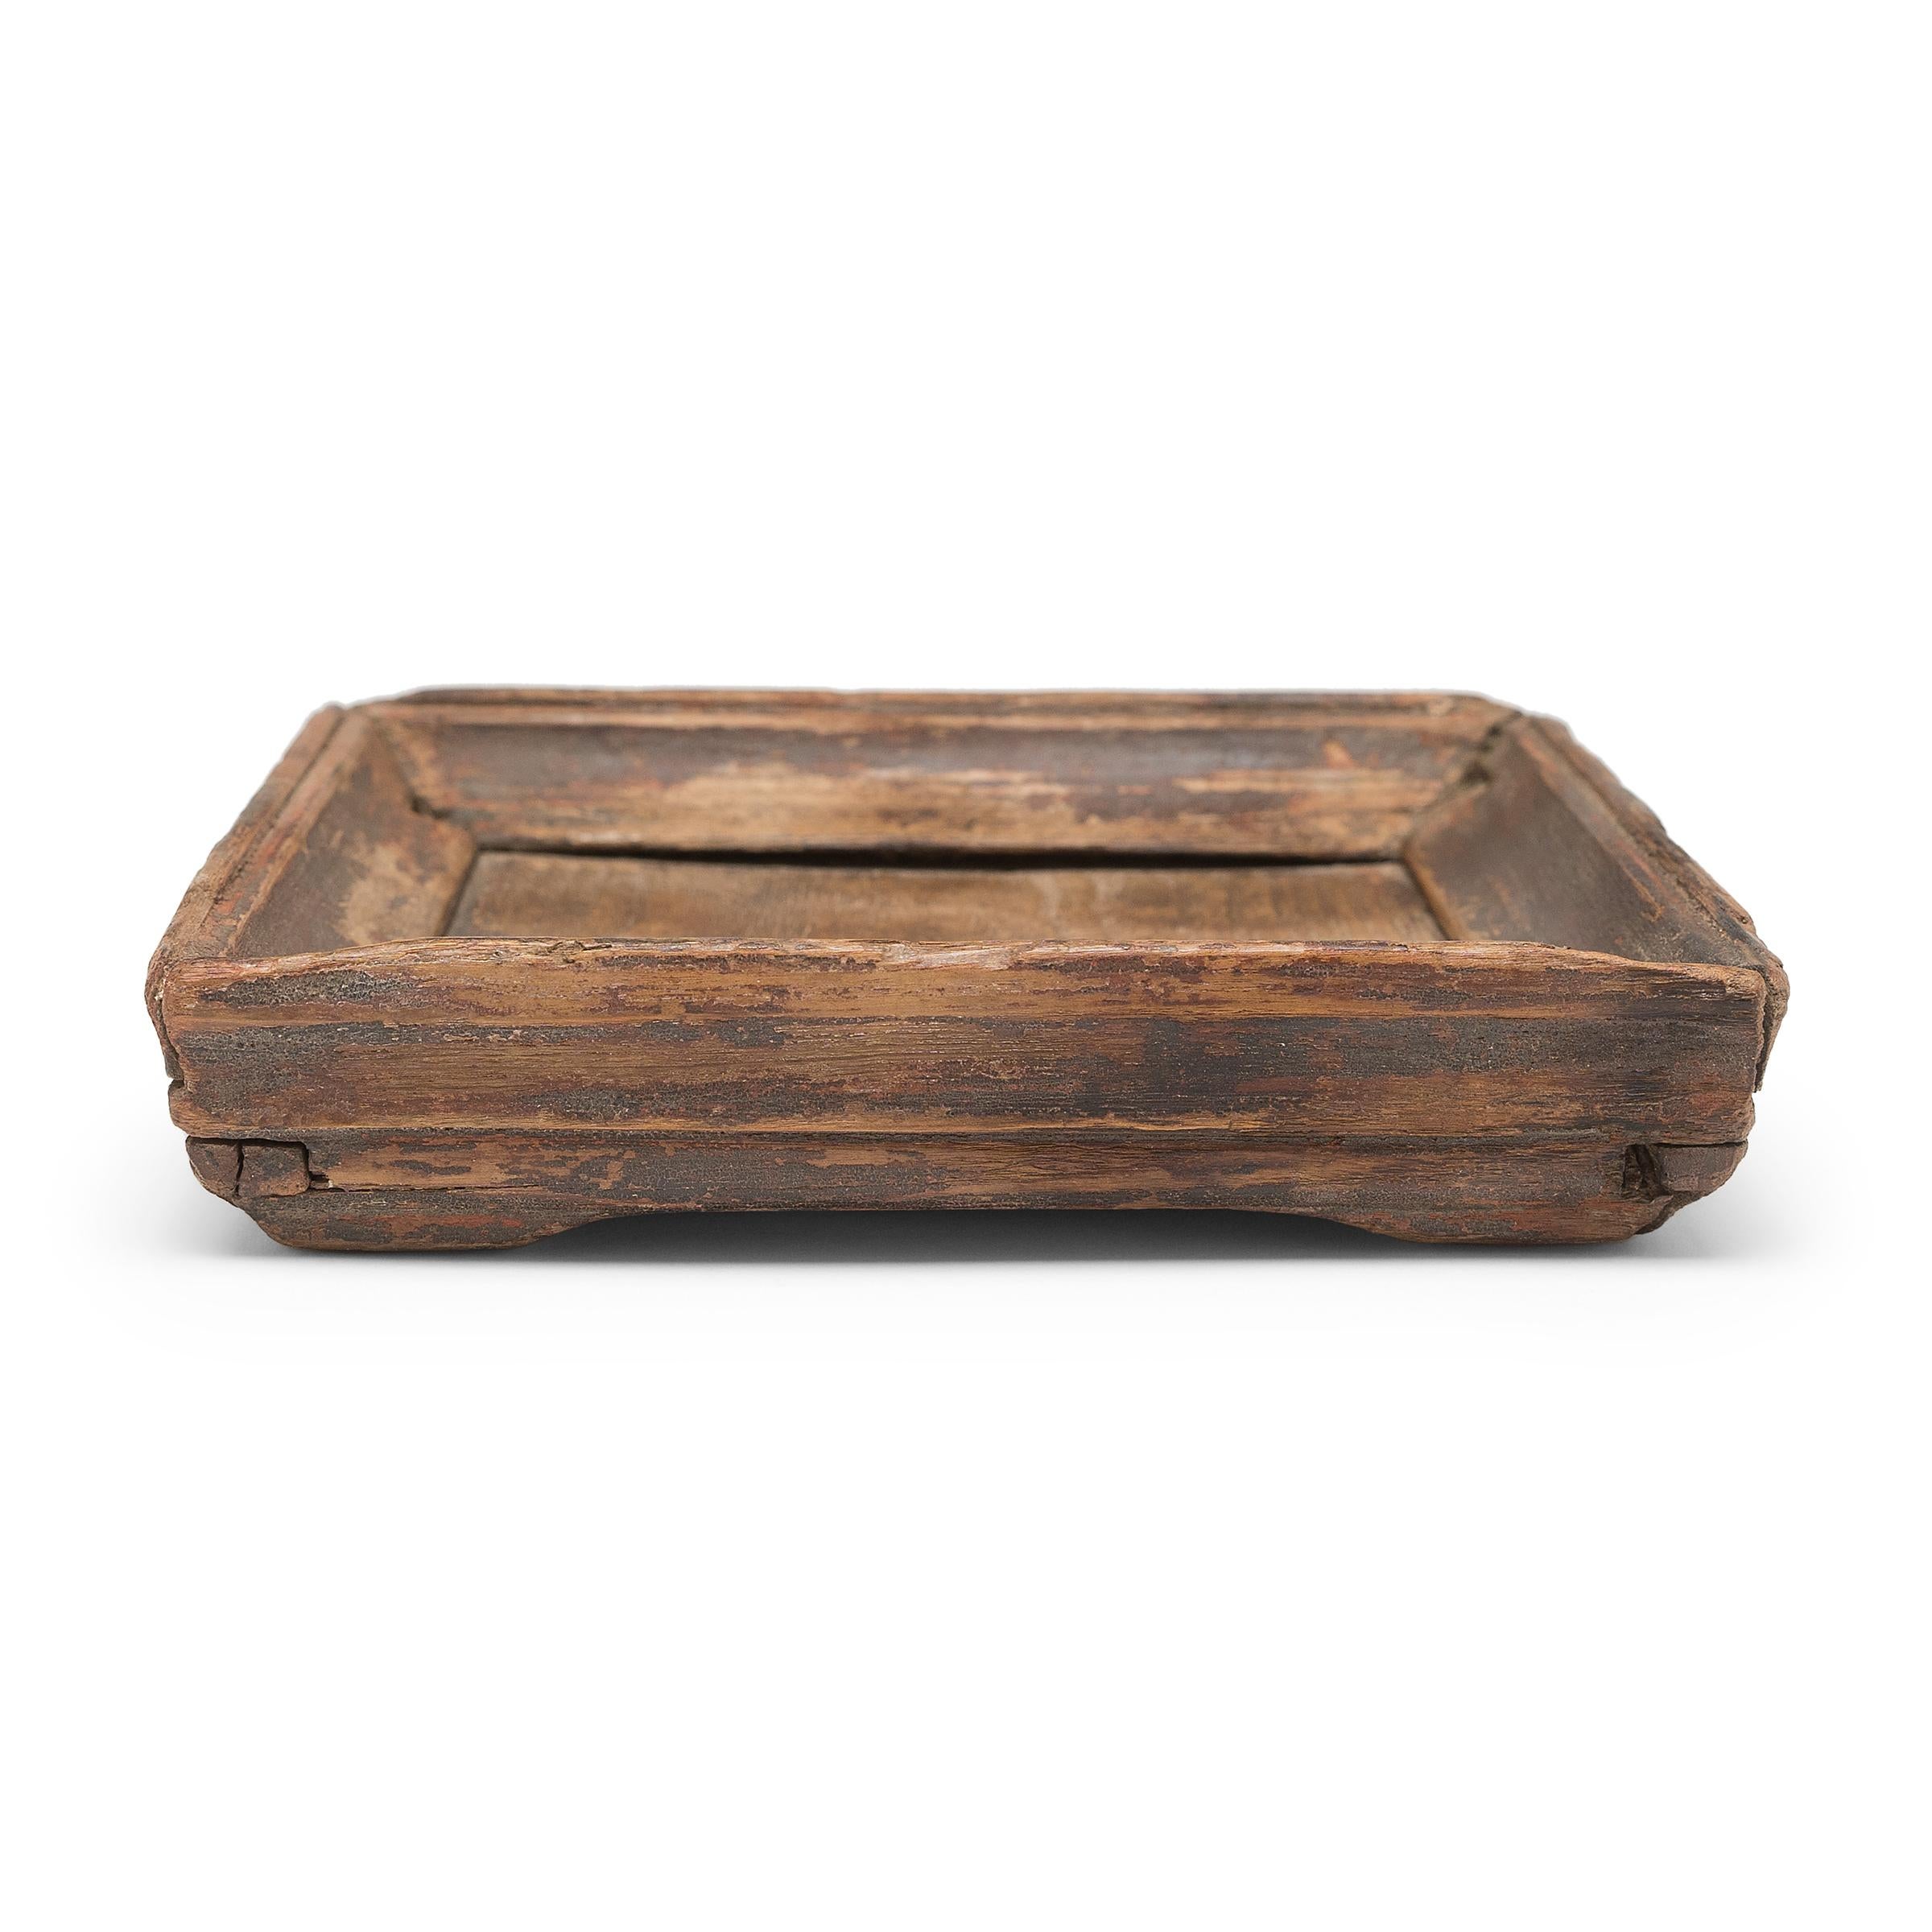 Simple lines, a modest form, and a layer of hand-brushed lacquer give this petite Qing-dynasty tray a provincial charm that recalls the warmth of home. The brown lacquer finish has weathered with time to reveal the light brown coloring of its pine